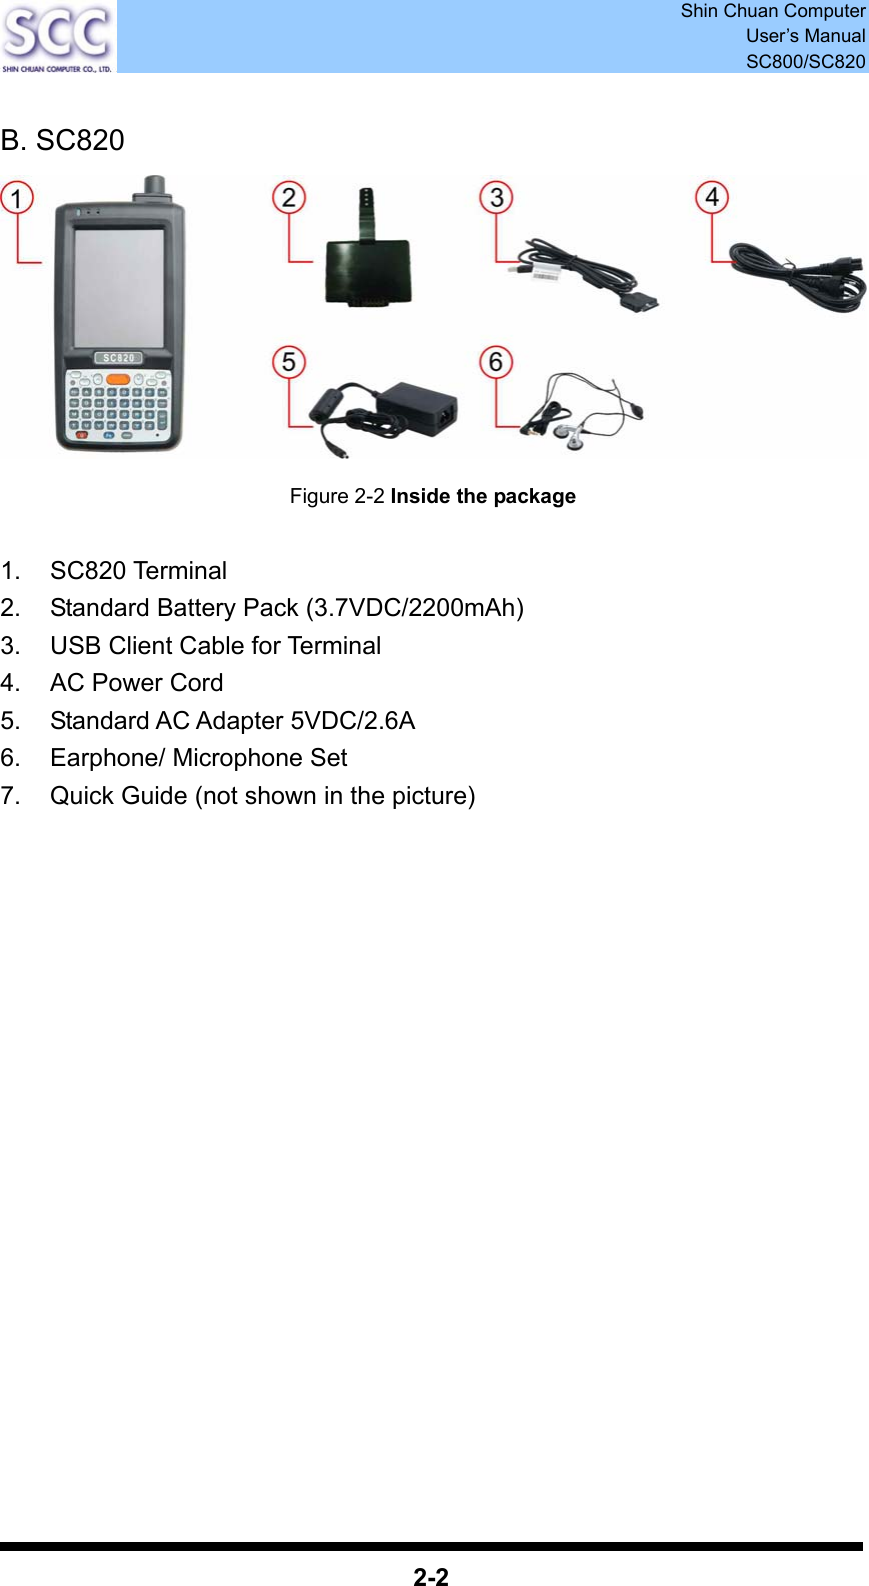  Shin Chuan Computer User’s Manual SC800/SC820  2-2  B. SC820  Figure 2-2 Inside the package  1. SC820 Terminal 2.  Standard Battery Pack (3.7VDC/2200mAh) 3.  USB Client Cable for Terminal 4.  AC Power Cord 5.  Standard AC Adapter 5VDC/2.6A 6.  Earphone/ Microphone Set 7.  Quick Guide (not shown in the picture)                   